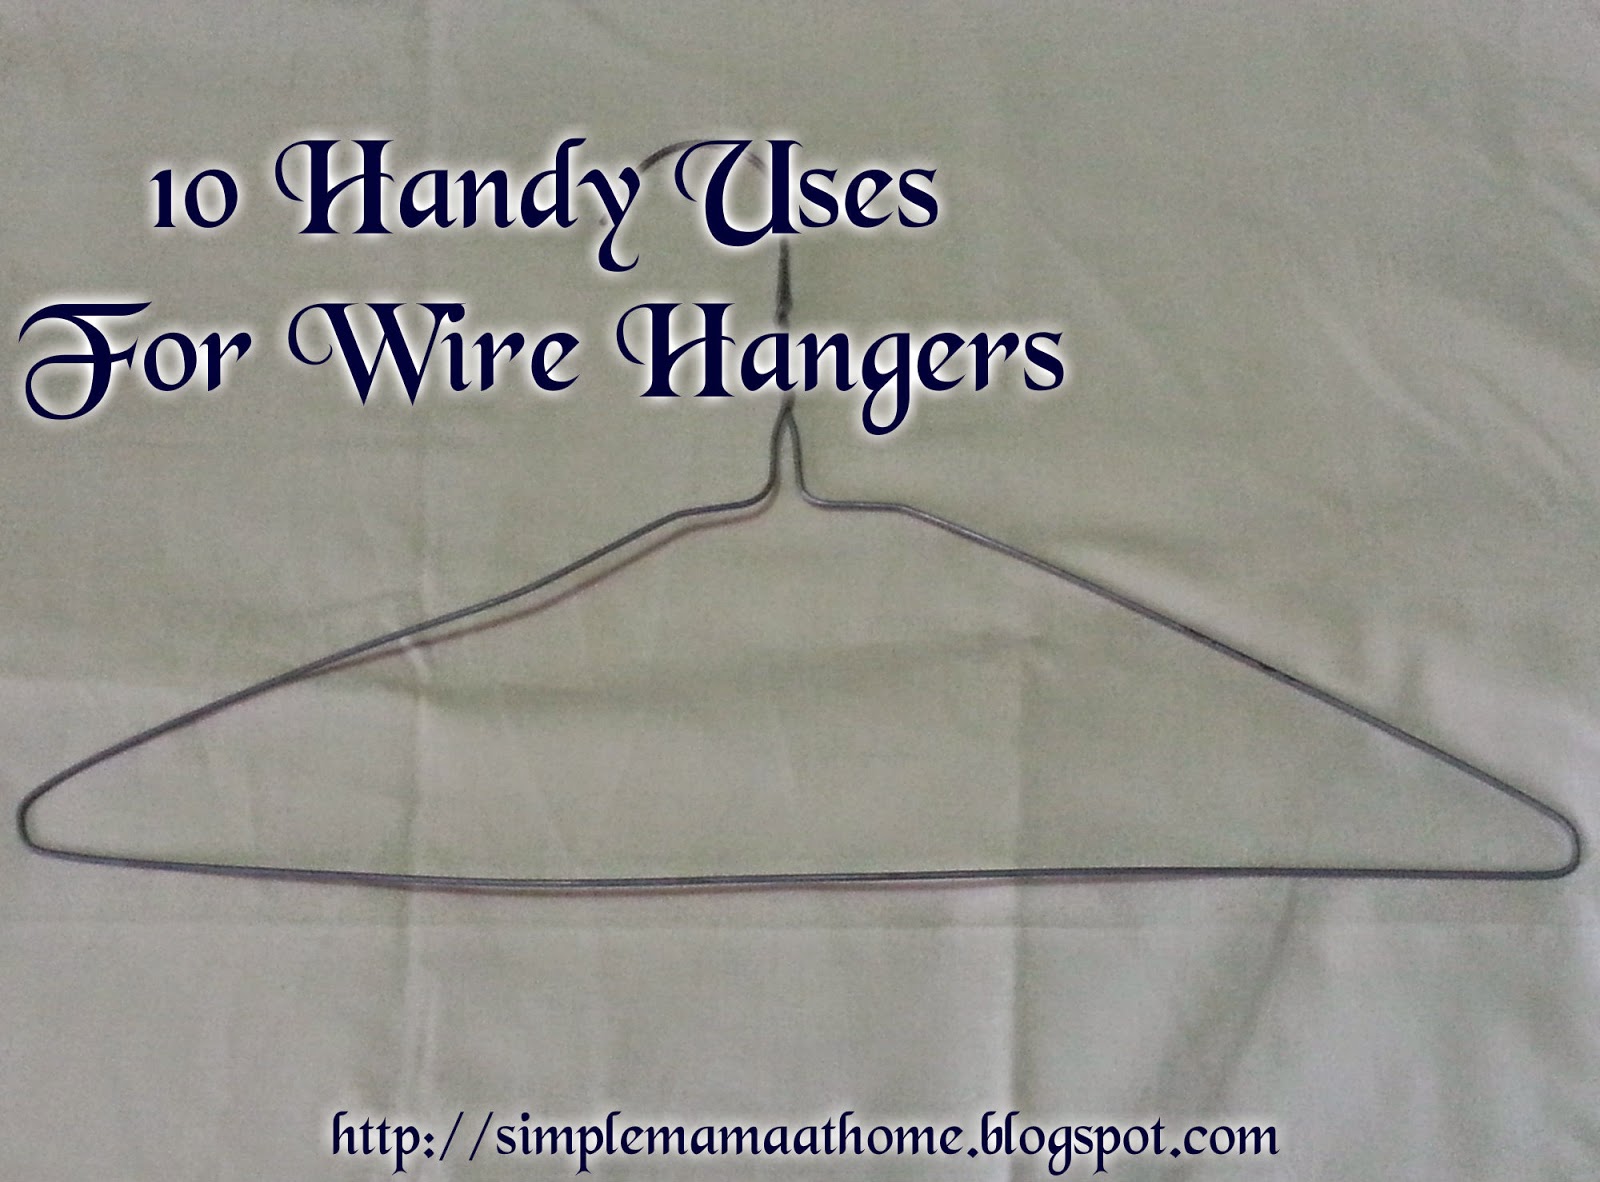 10 Handy Uses For Wire Hangers